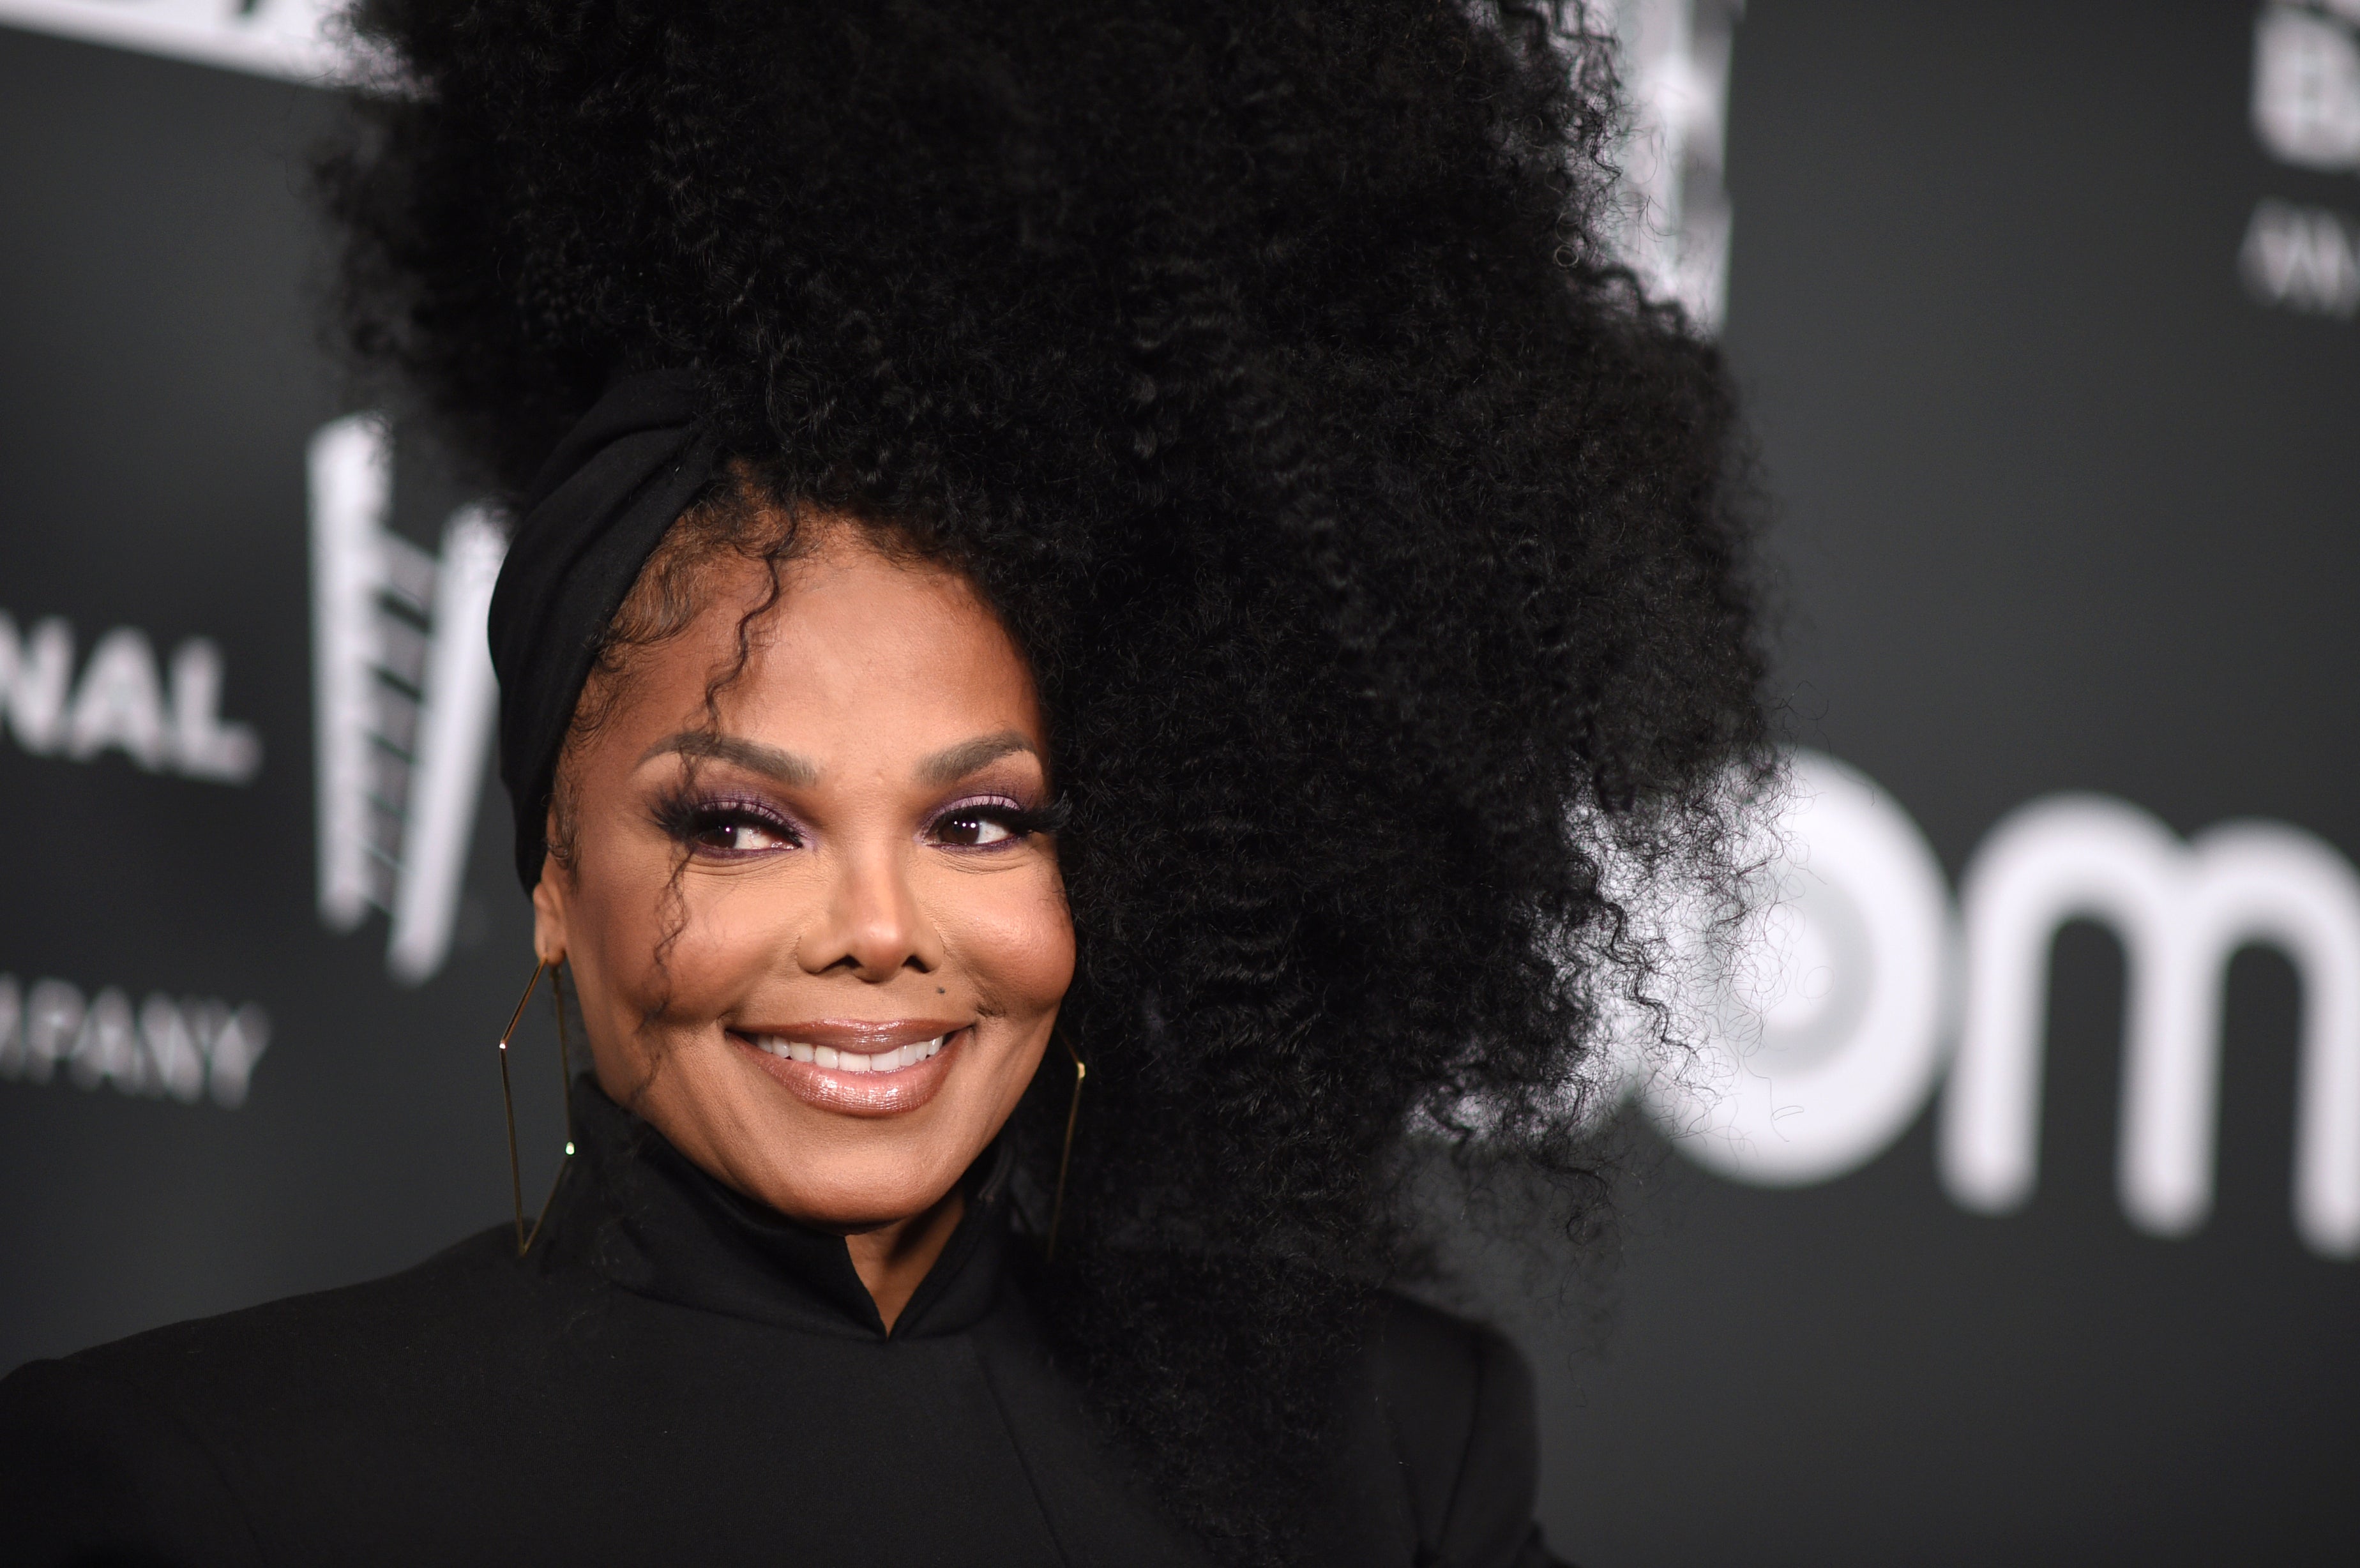 Hawks playoff win pushes Janet Jackson concert back 1 day | The Independent